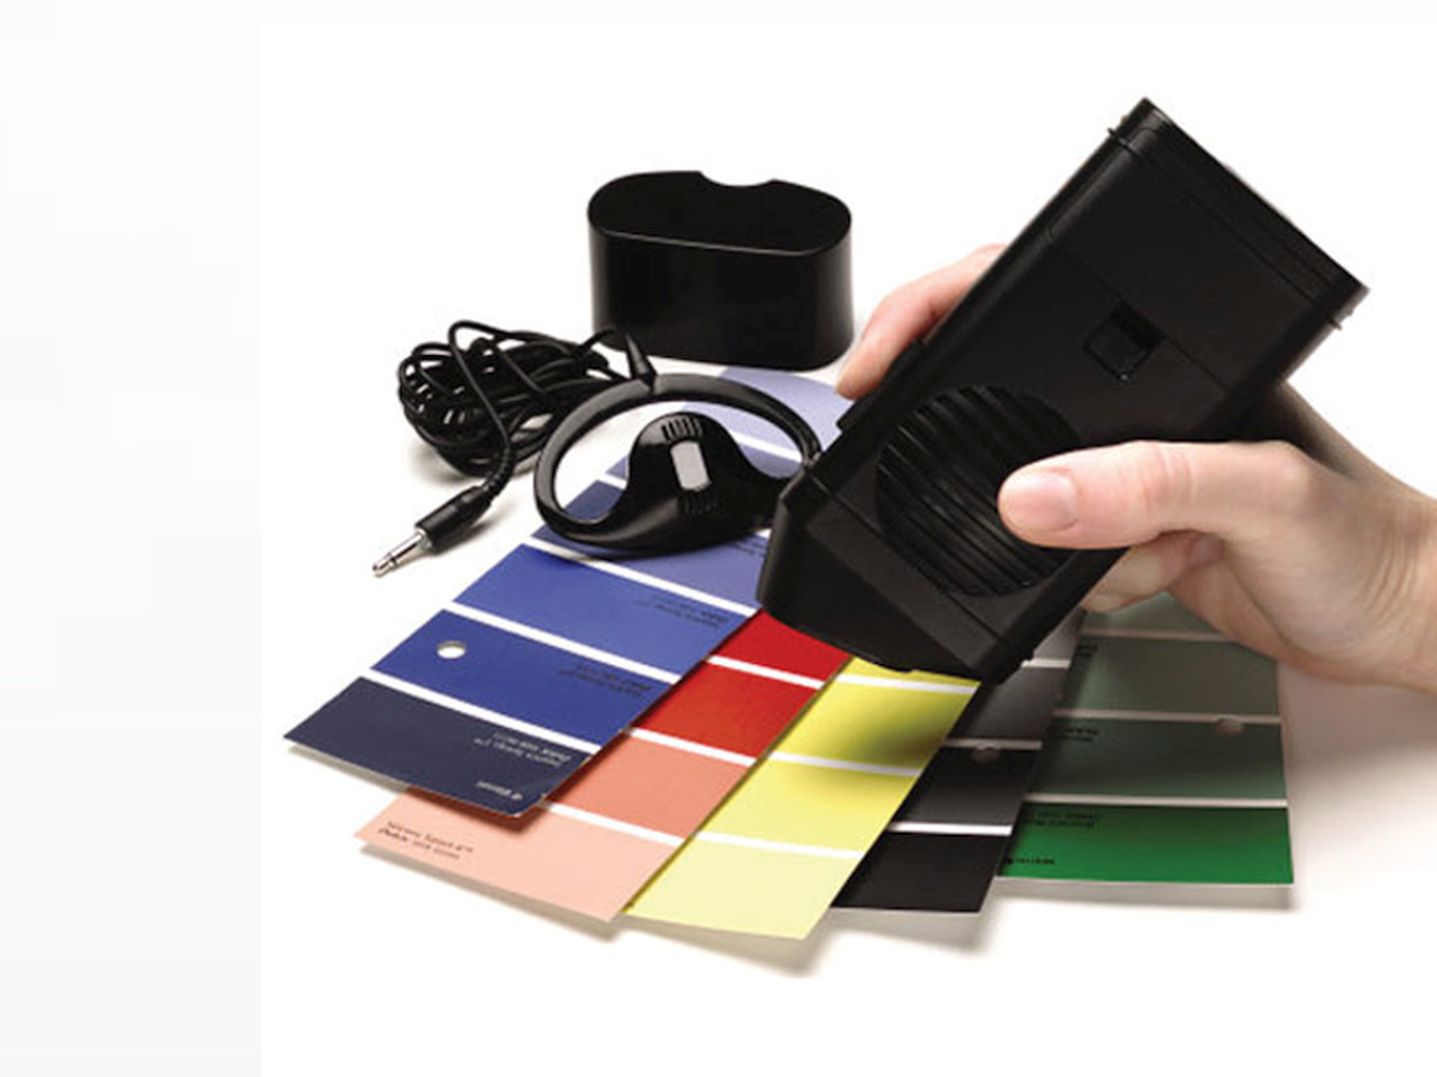 Talking Colour Detector held by a person's hand, with five cards of colour samples in the shades of blue, red, yellow, black and green placed in front of the device.